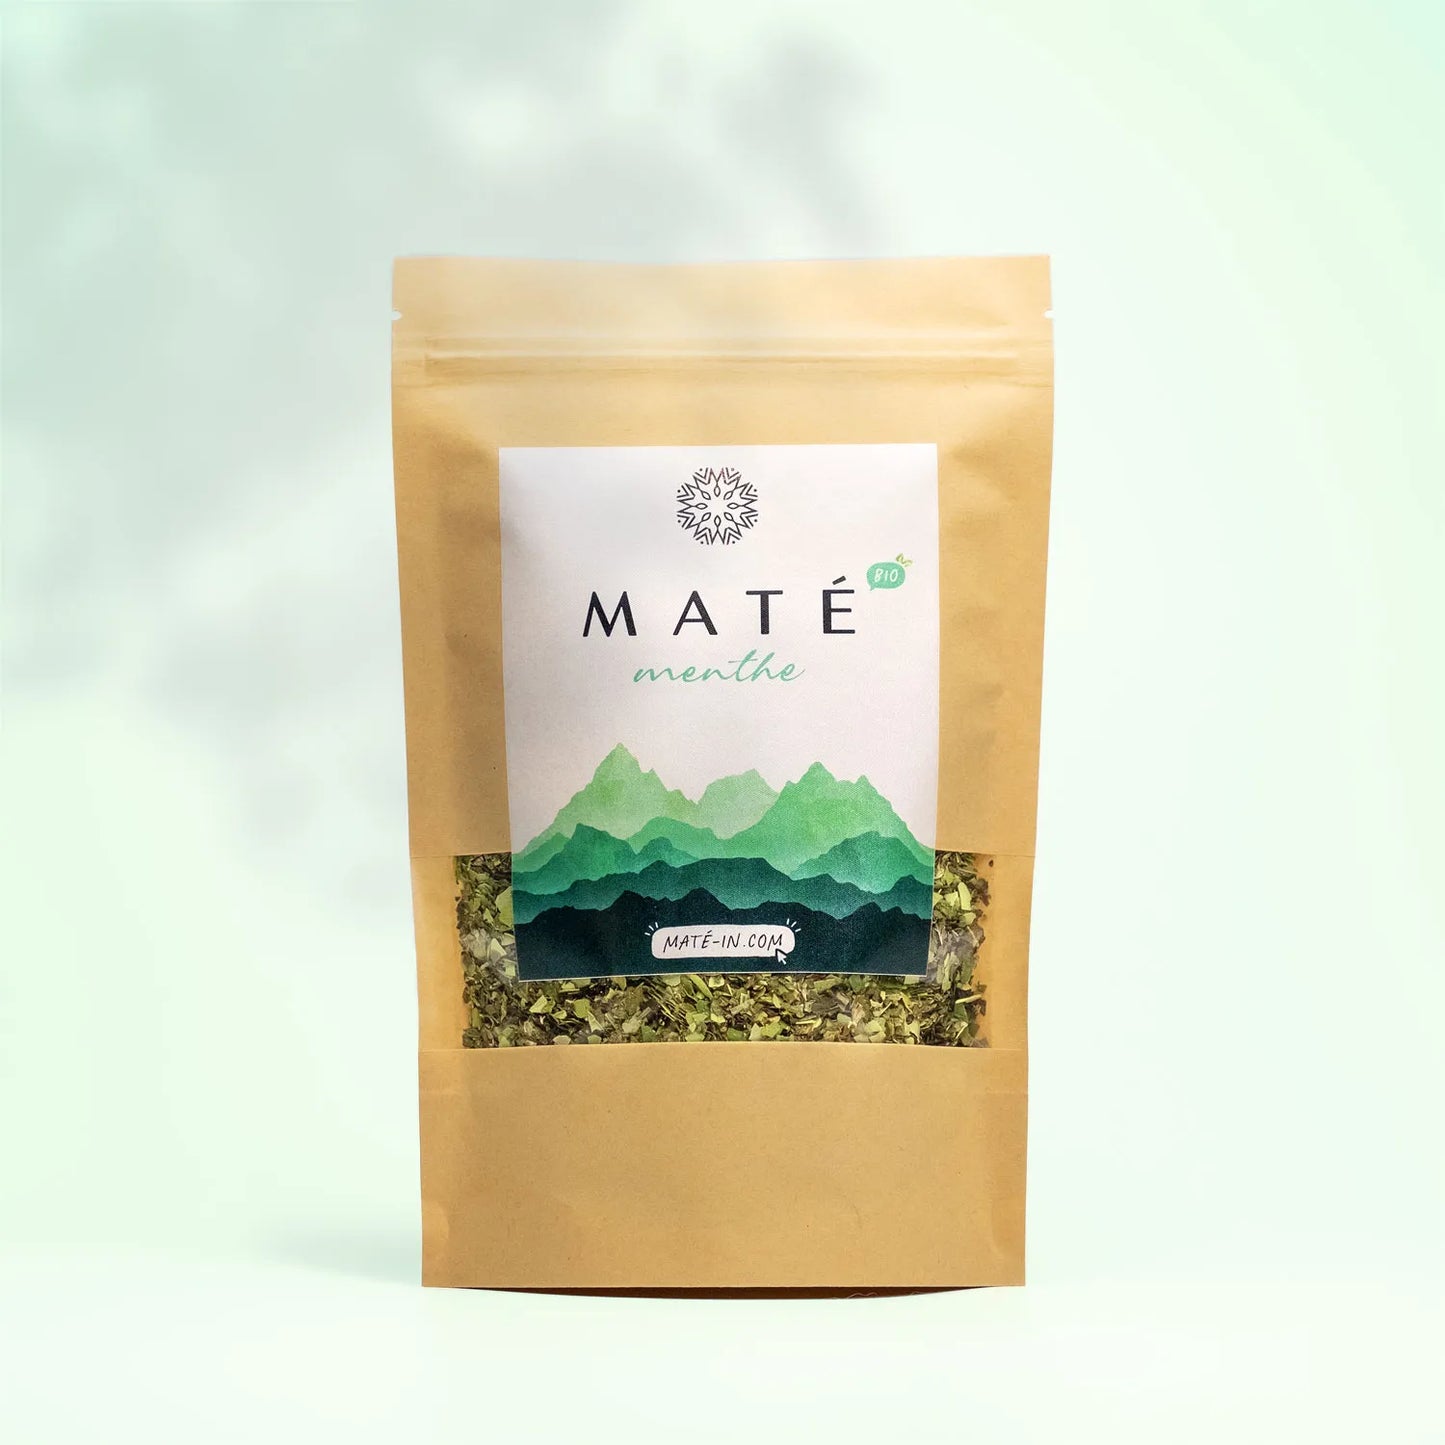 MATE BIO MENTHE 18INFUSETTES 36G HE MATE